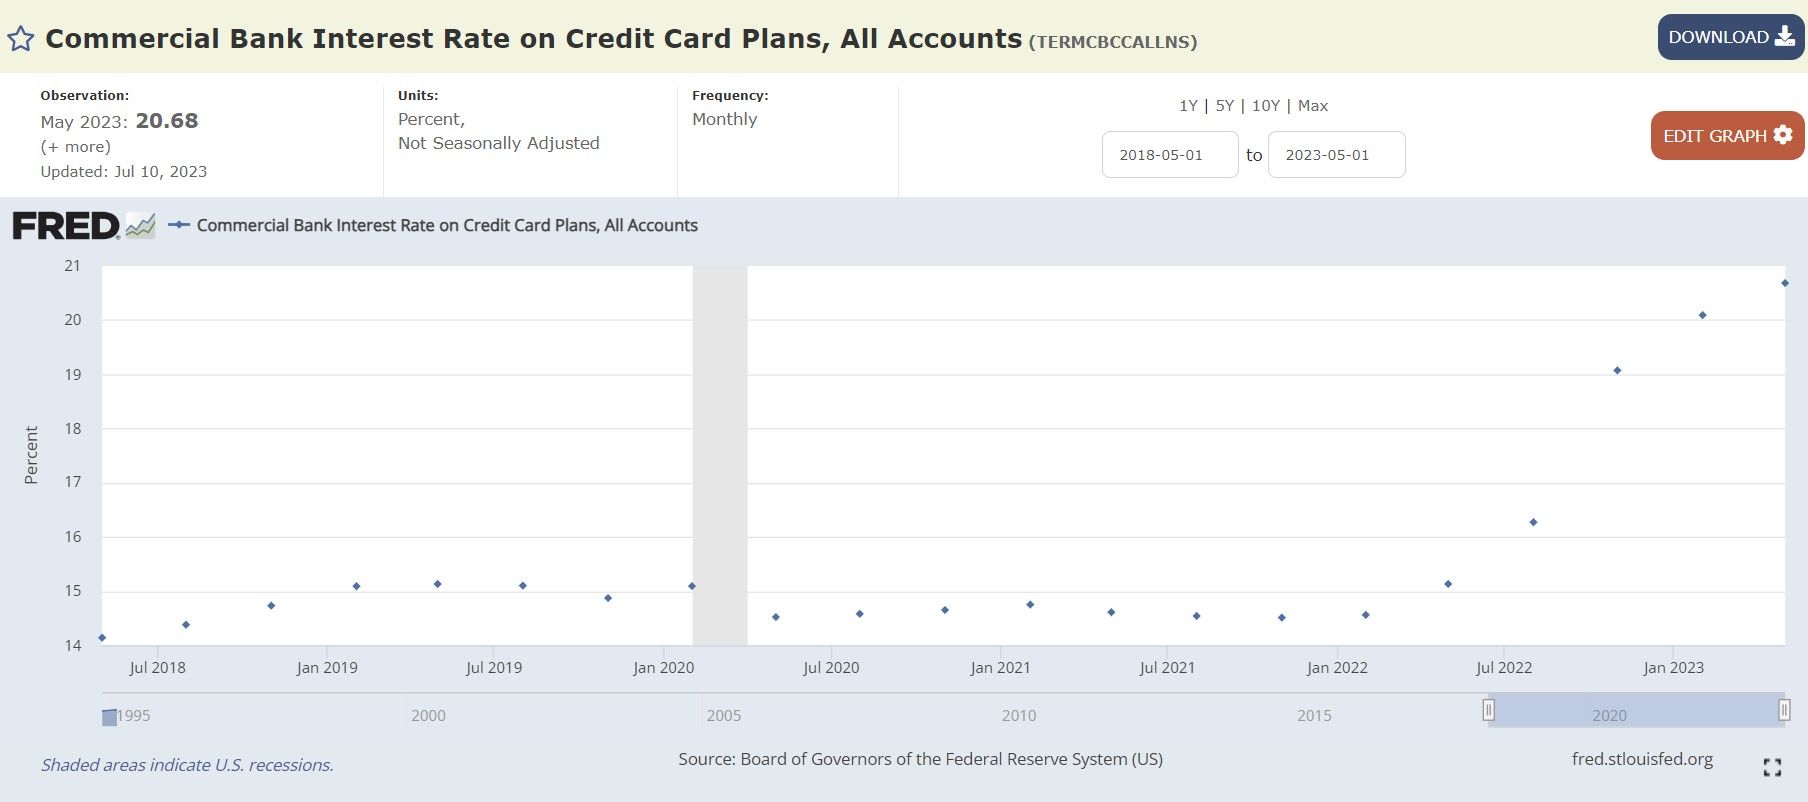 Commercial Bank Interest Rate on Credit Card Plans